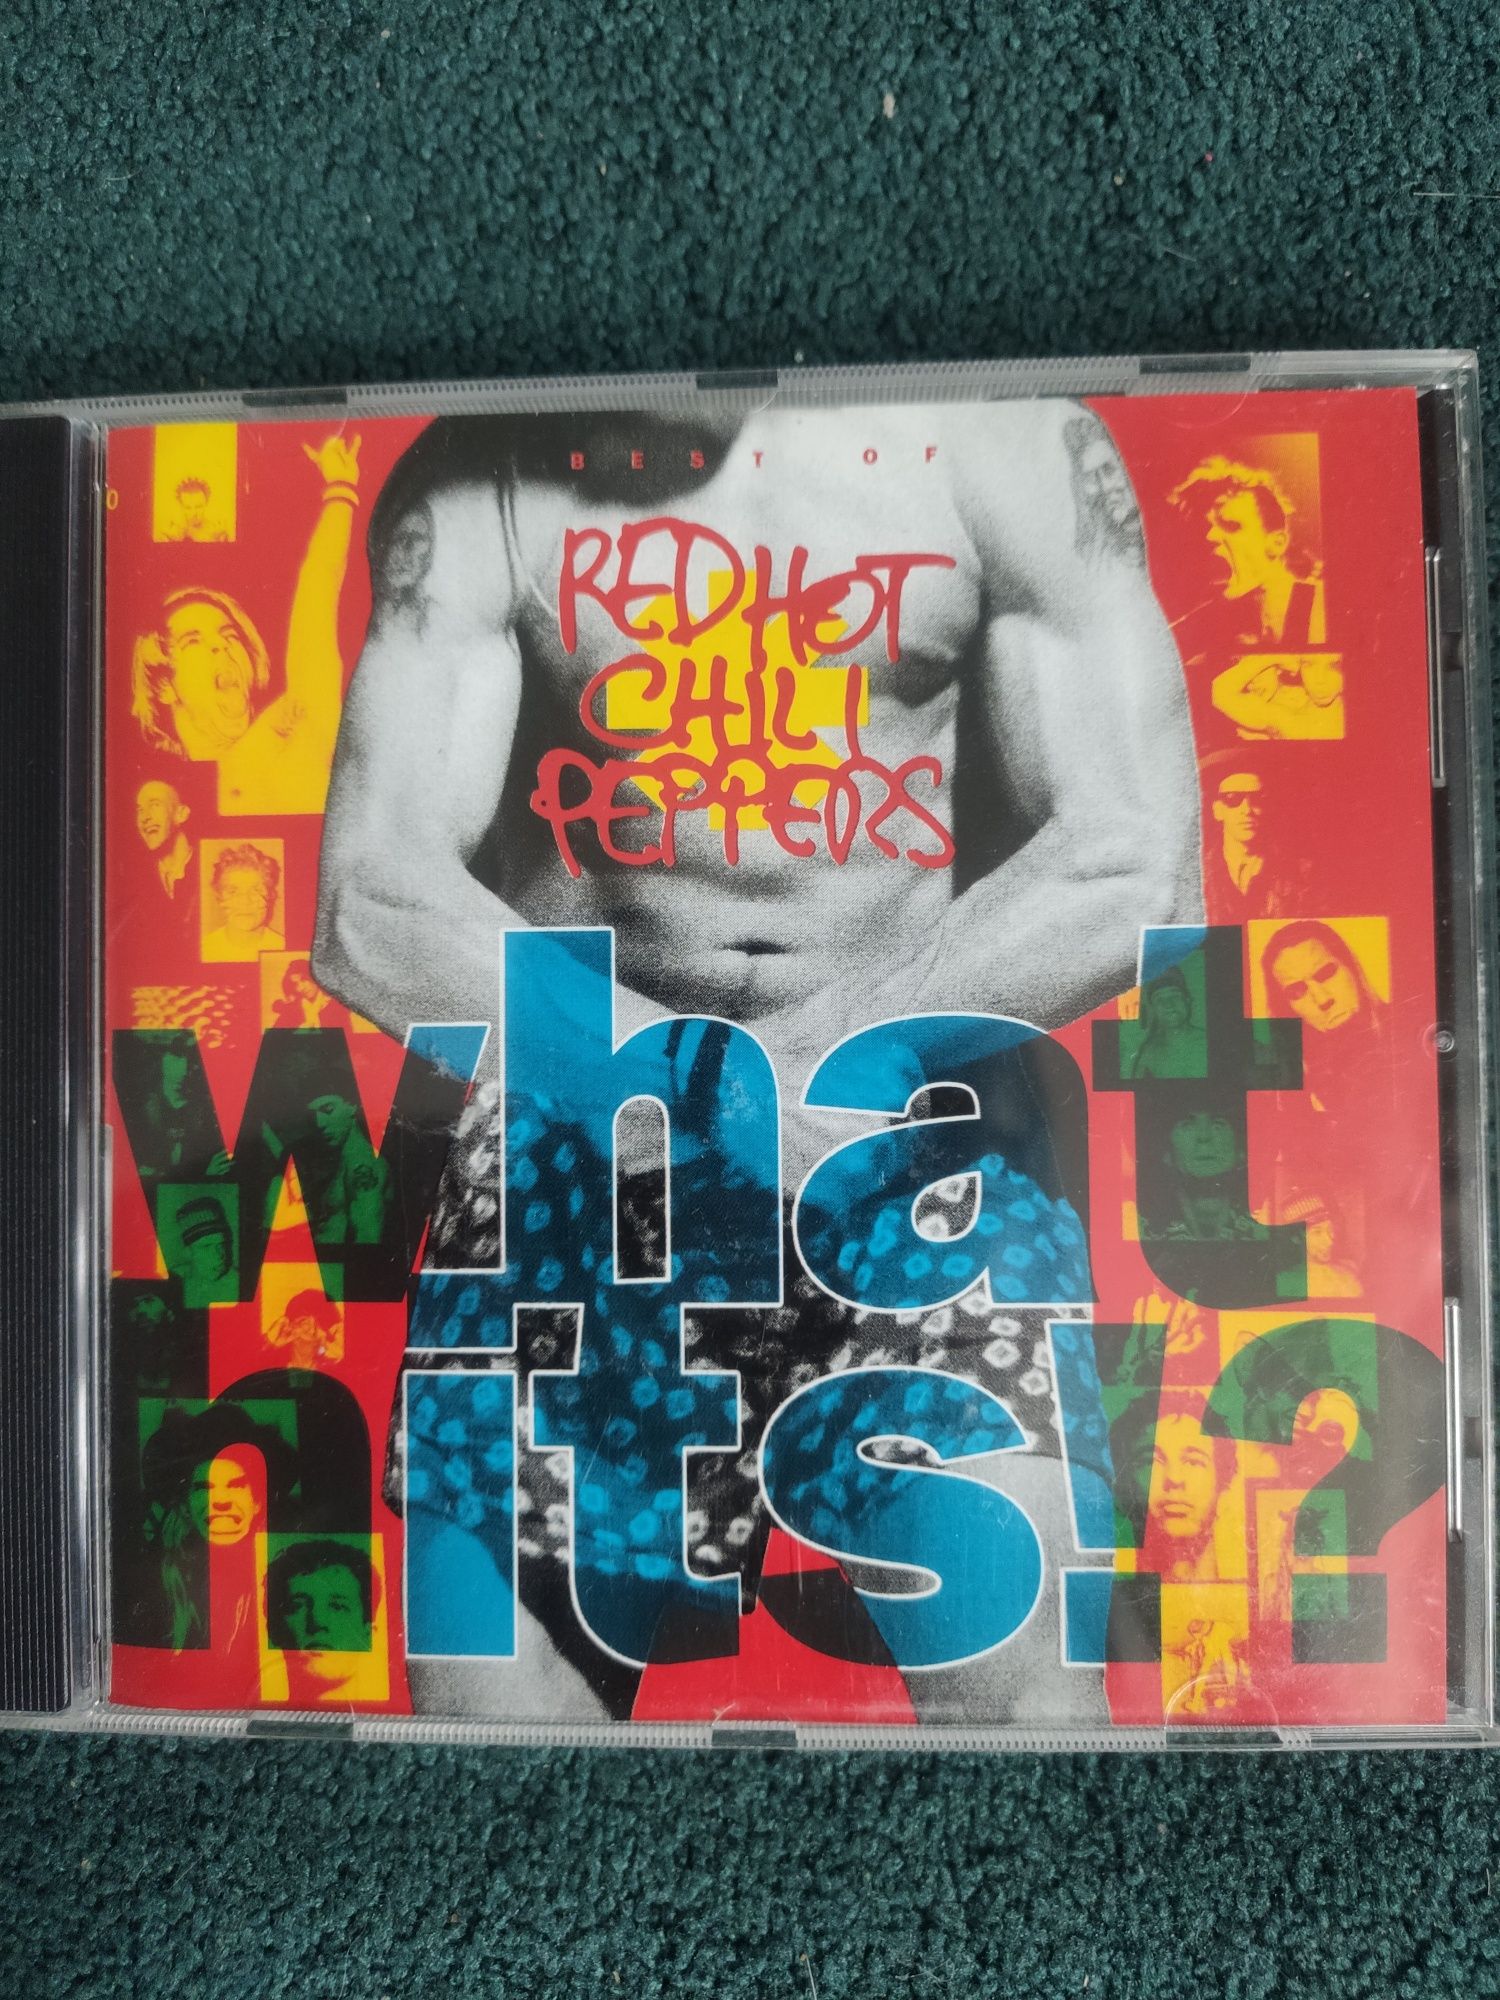 CD Red hot chili peppers what hits!?